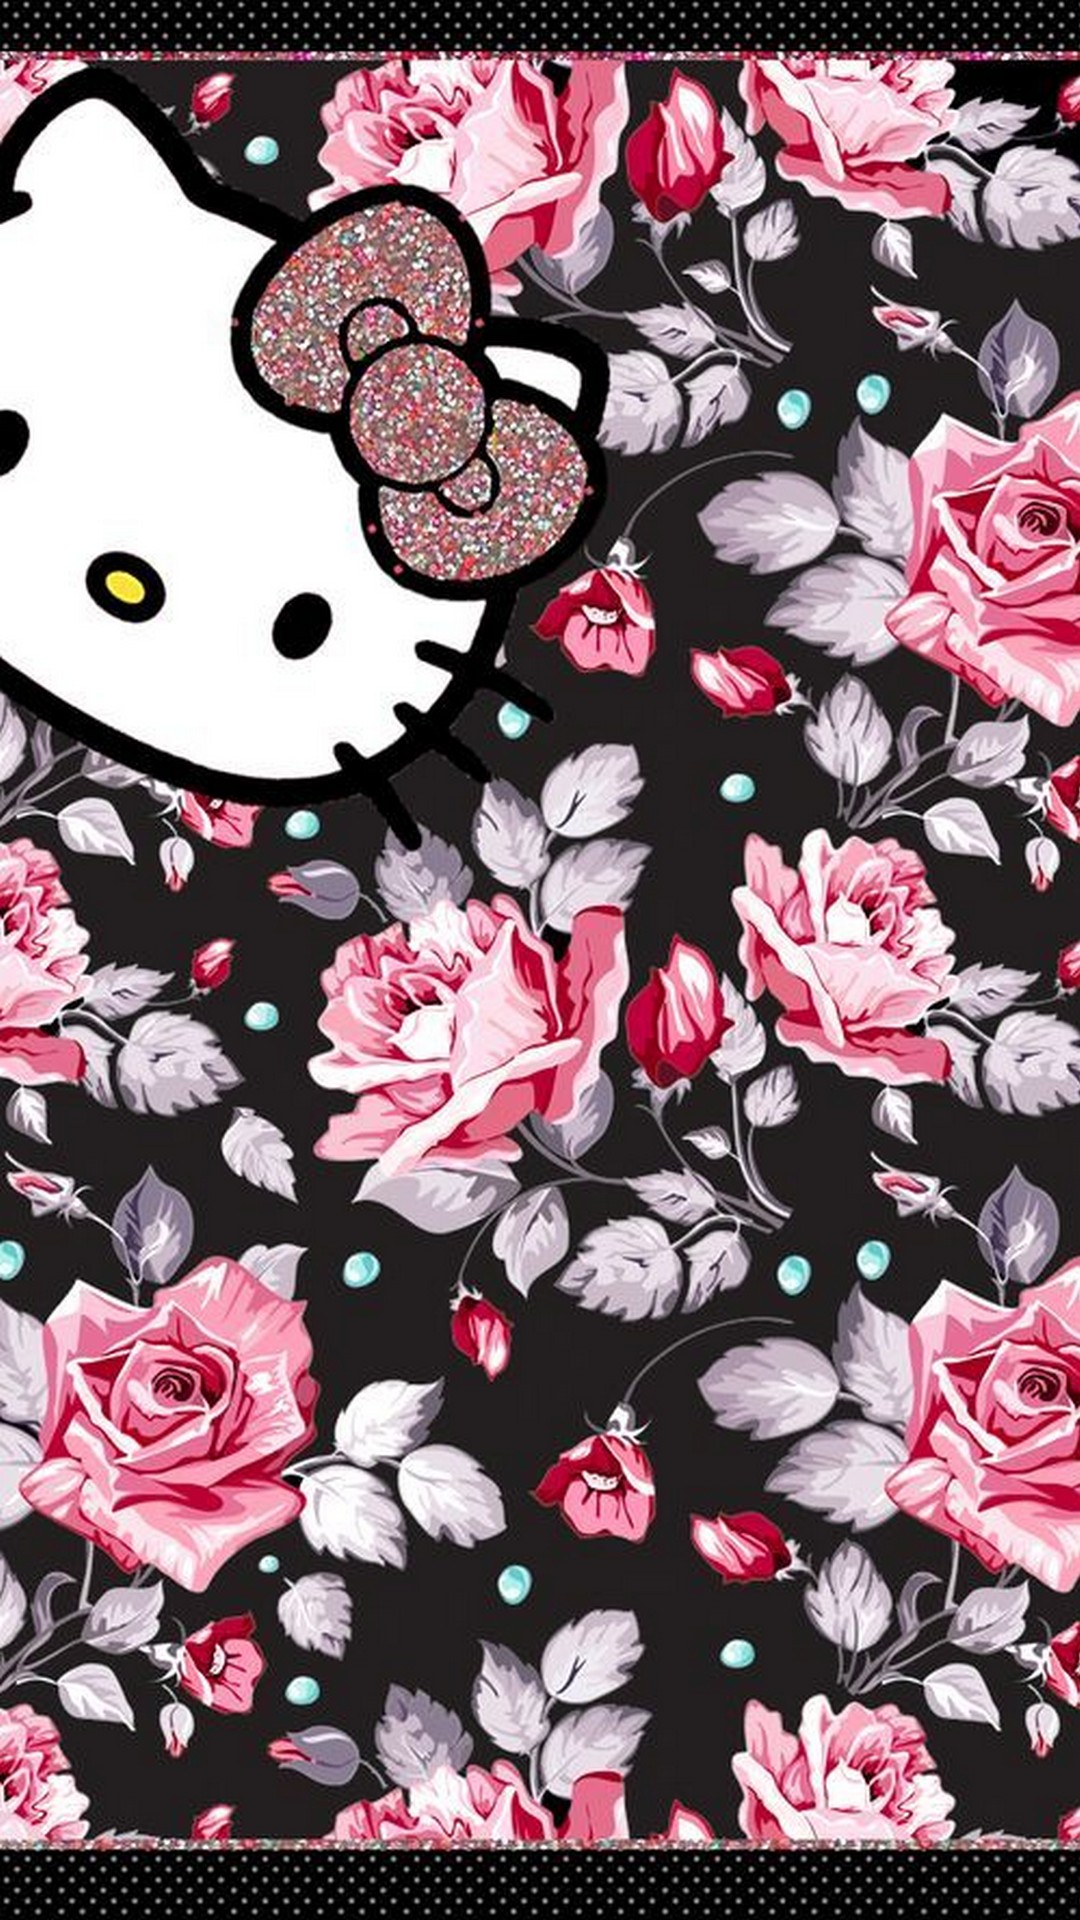 Free Download Hello Kitty Images Wallpaper Android 19 Android Wallpapers 1080x19 For Your Desktop Mobile Tablet Explore 52 Wallpapers Of Kitty Cute Hello Kitty Wallpaper Hello Kitty Wallpapers Hello